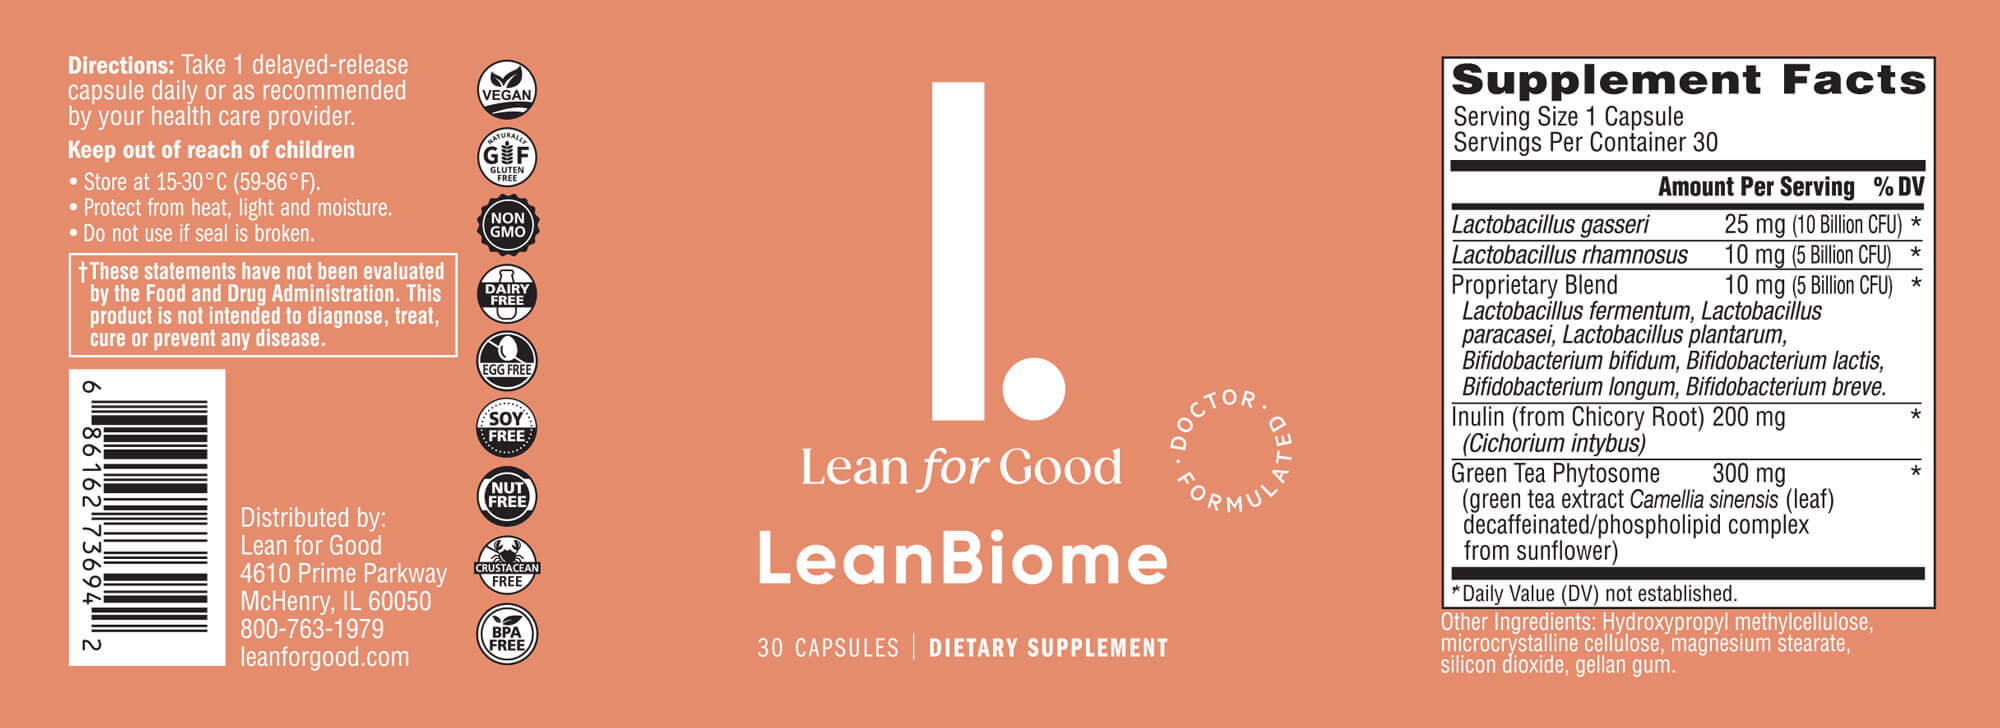 leanbiome-supplement-facts